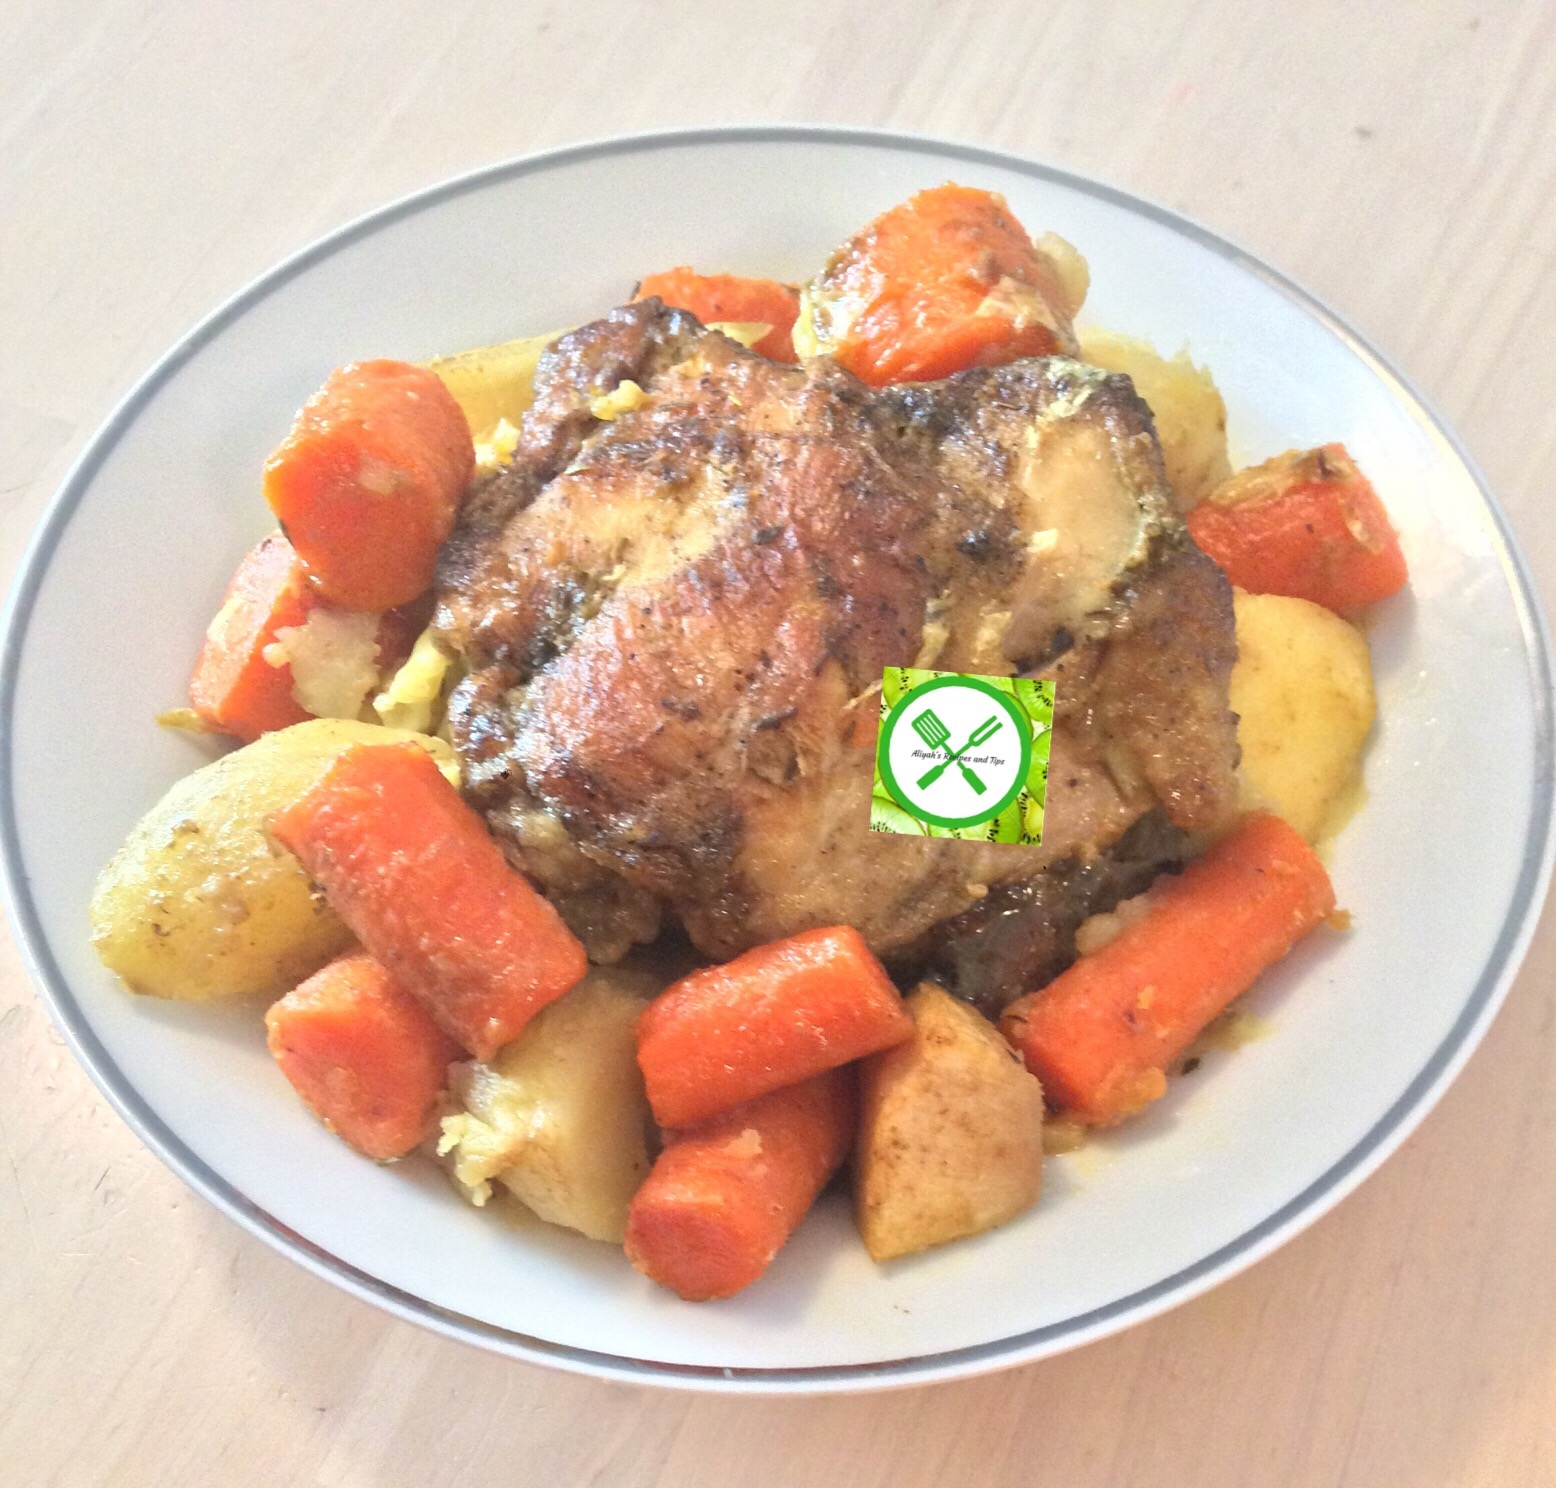 Braised Chicken With Vegetable